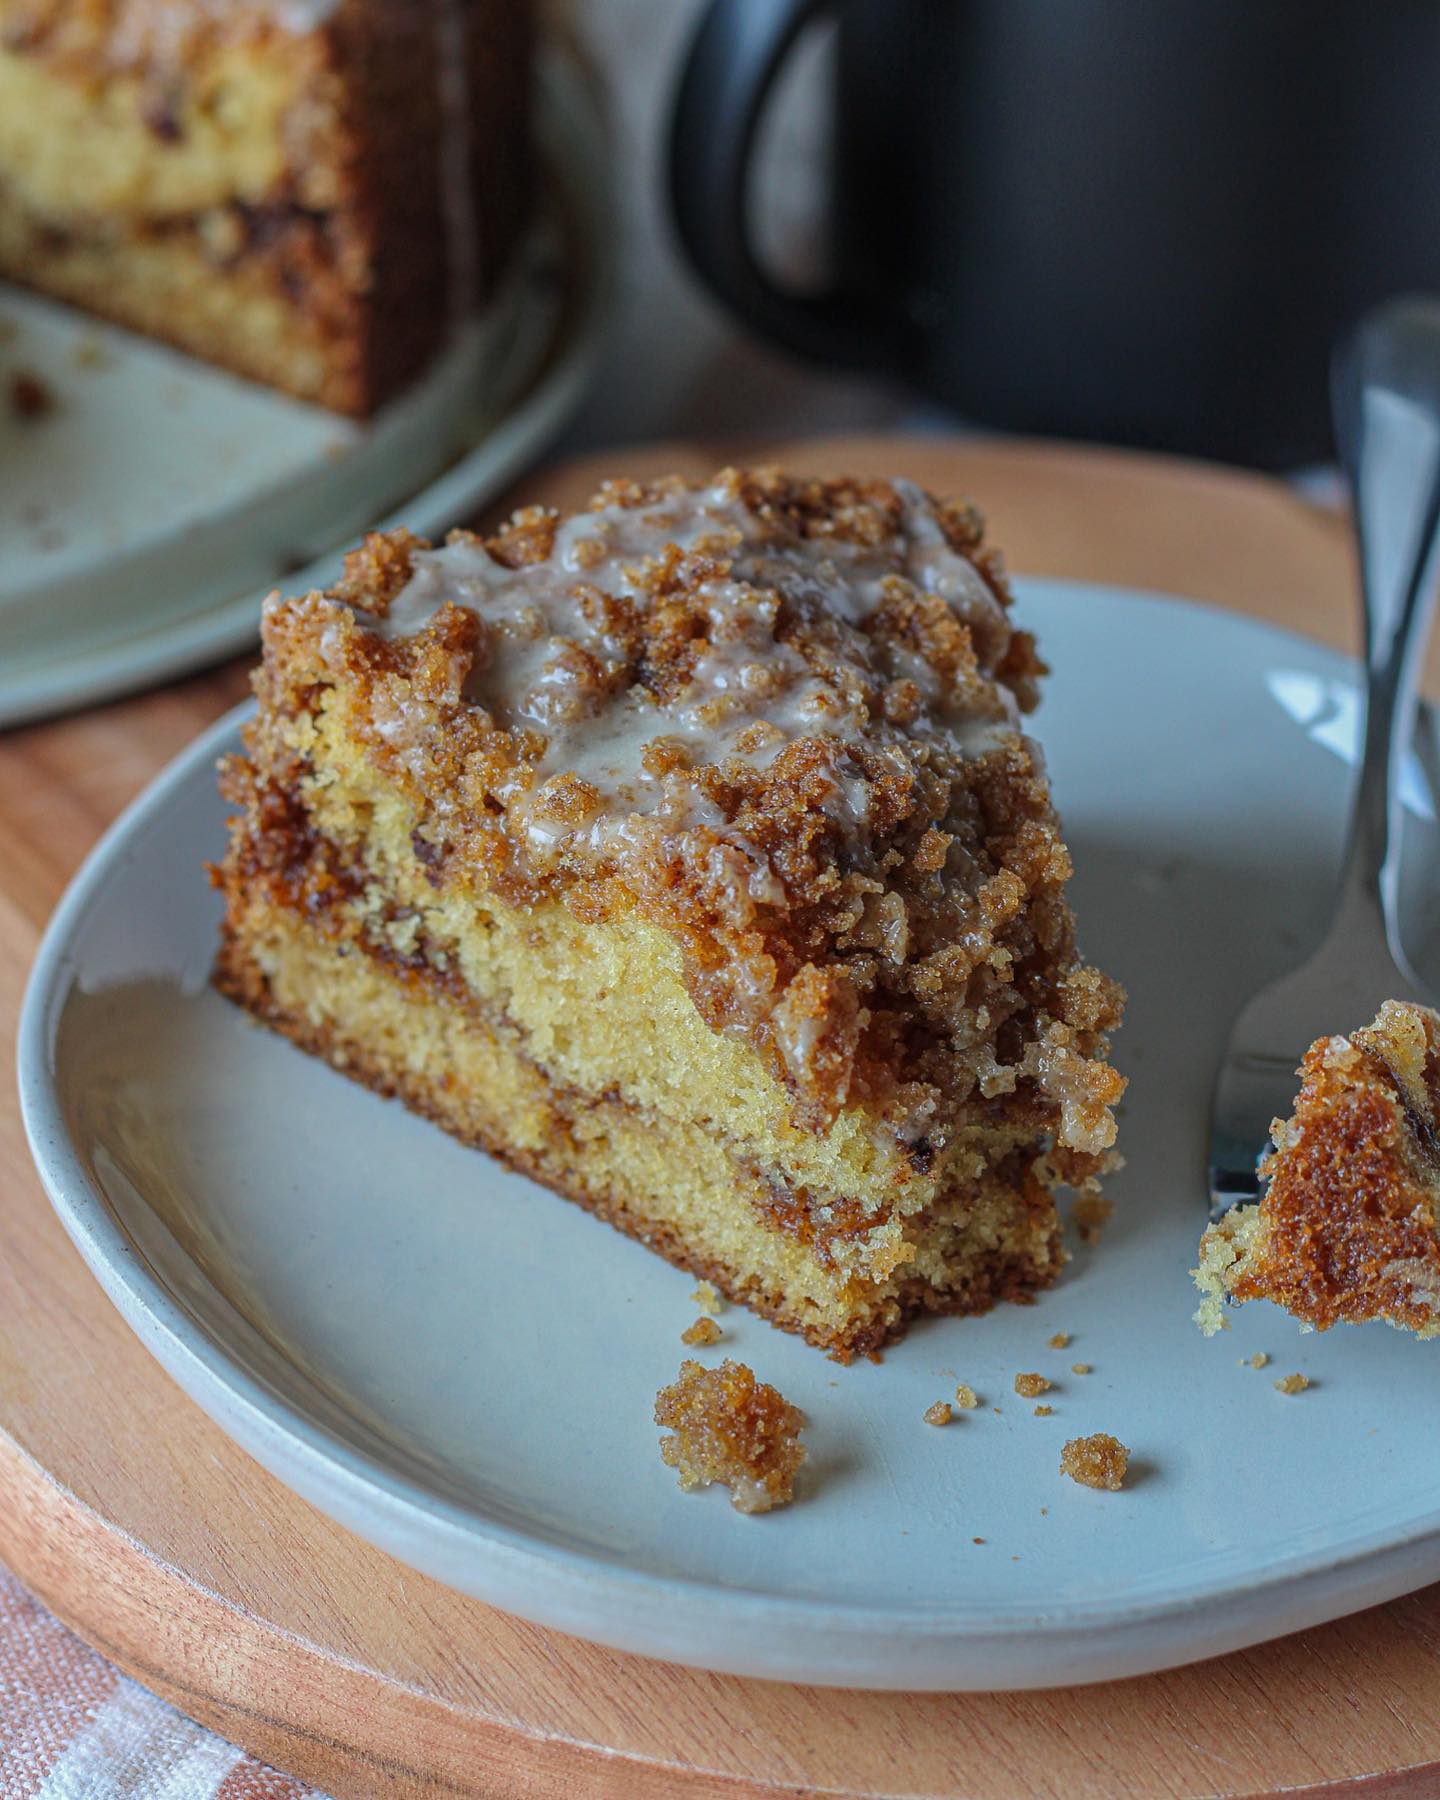 I love sharing this recipe around Thanksgiving time! 

Growing up when my mom and I would be doing our baking the day before Thanksgiving, the last thing we’d do was whip up a coffee cake for breakfast. I have lots of memories enjoying breakfast while watching the Macy’s Thanksgiving Day Parade on TV. 

Click the link in my bio, then search 🔍 “Coffee Cake” 😋🦃🍰☕️